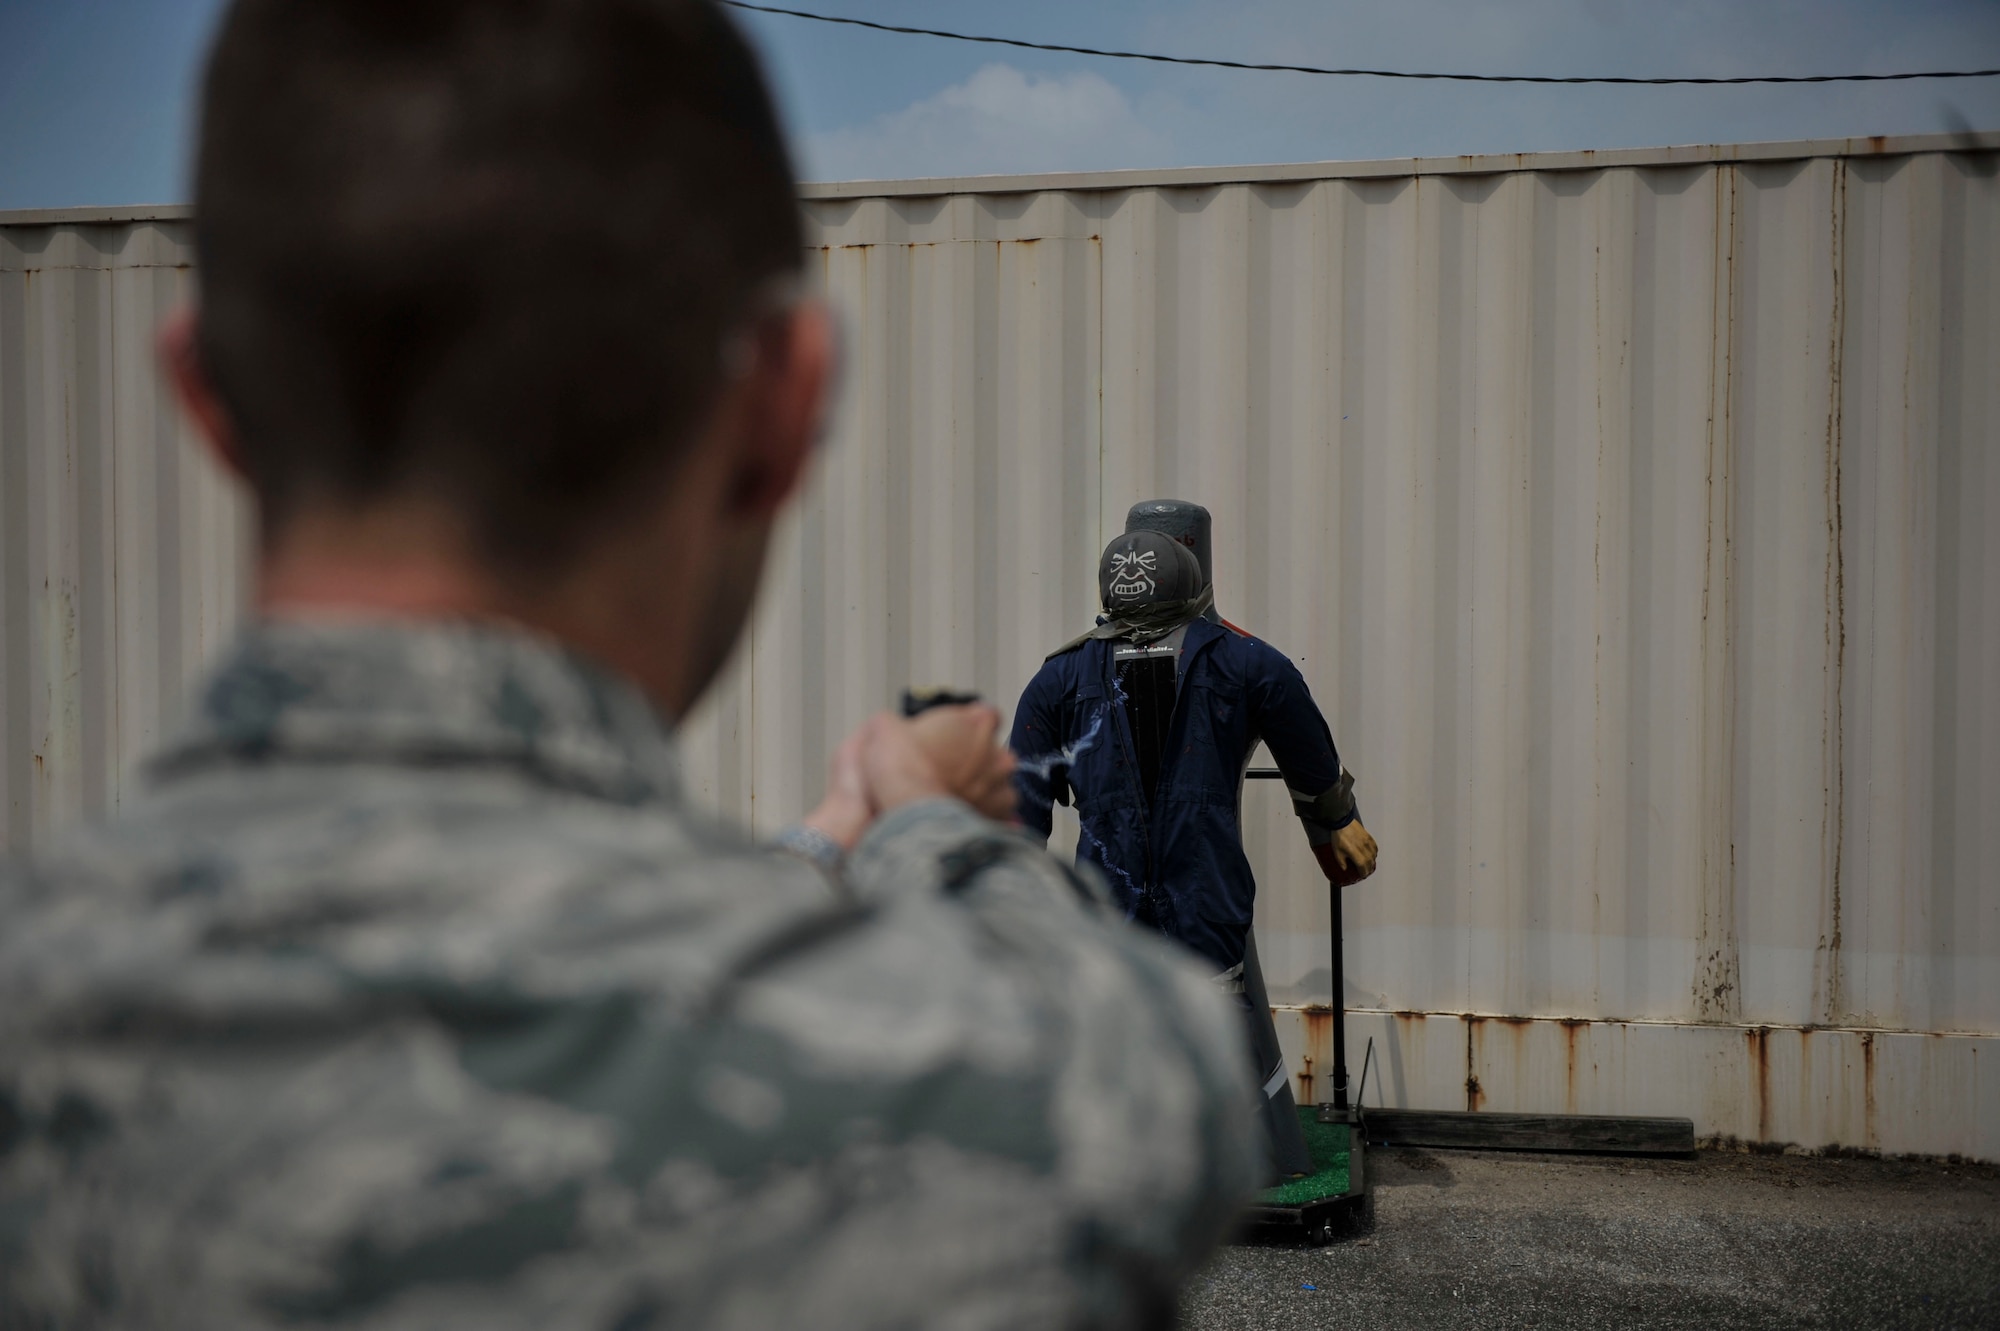 Capt. Tate Grogan, 51st Security Forces Squadron assistant operations officer, shoots a dummy during Taser training on Osan Air Base, Republic of Korea, June 27, 2014. The weapon uses electrical current to disrupt voluntary control of muscles causing neuromuscular incapacitation. (U.S. Air Force photo/Senior Airman David Owsianka)